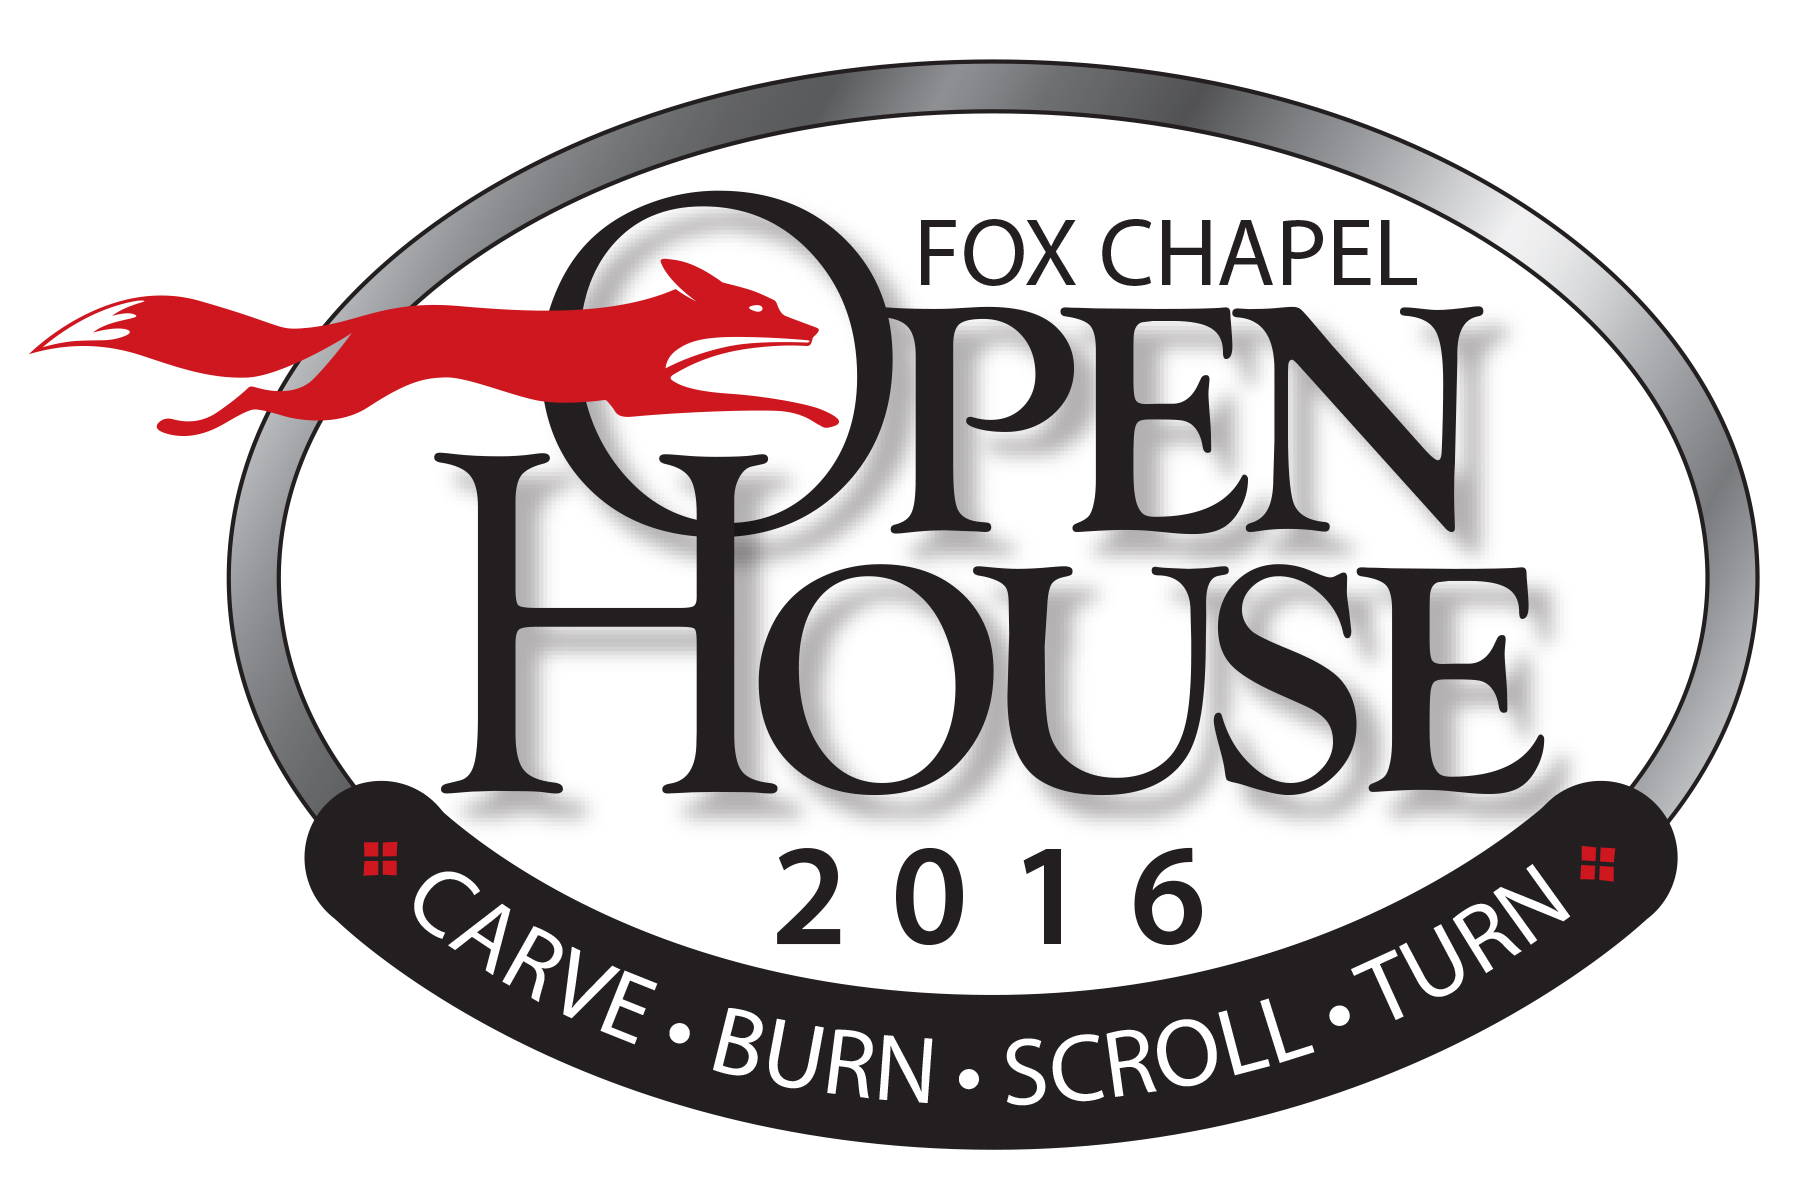 The 2016 Fox Chapel Publishing Open House and Woodworking Show will be here before you know it!